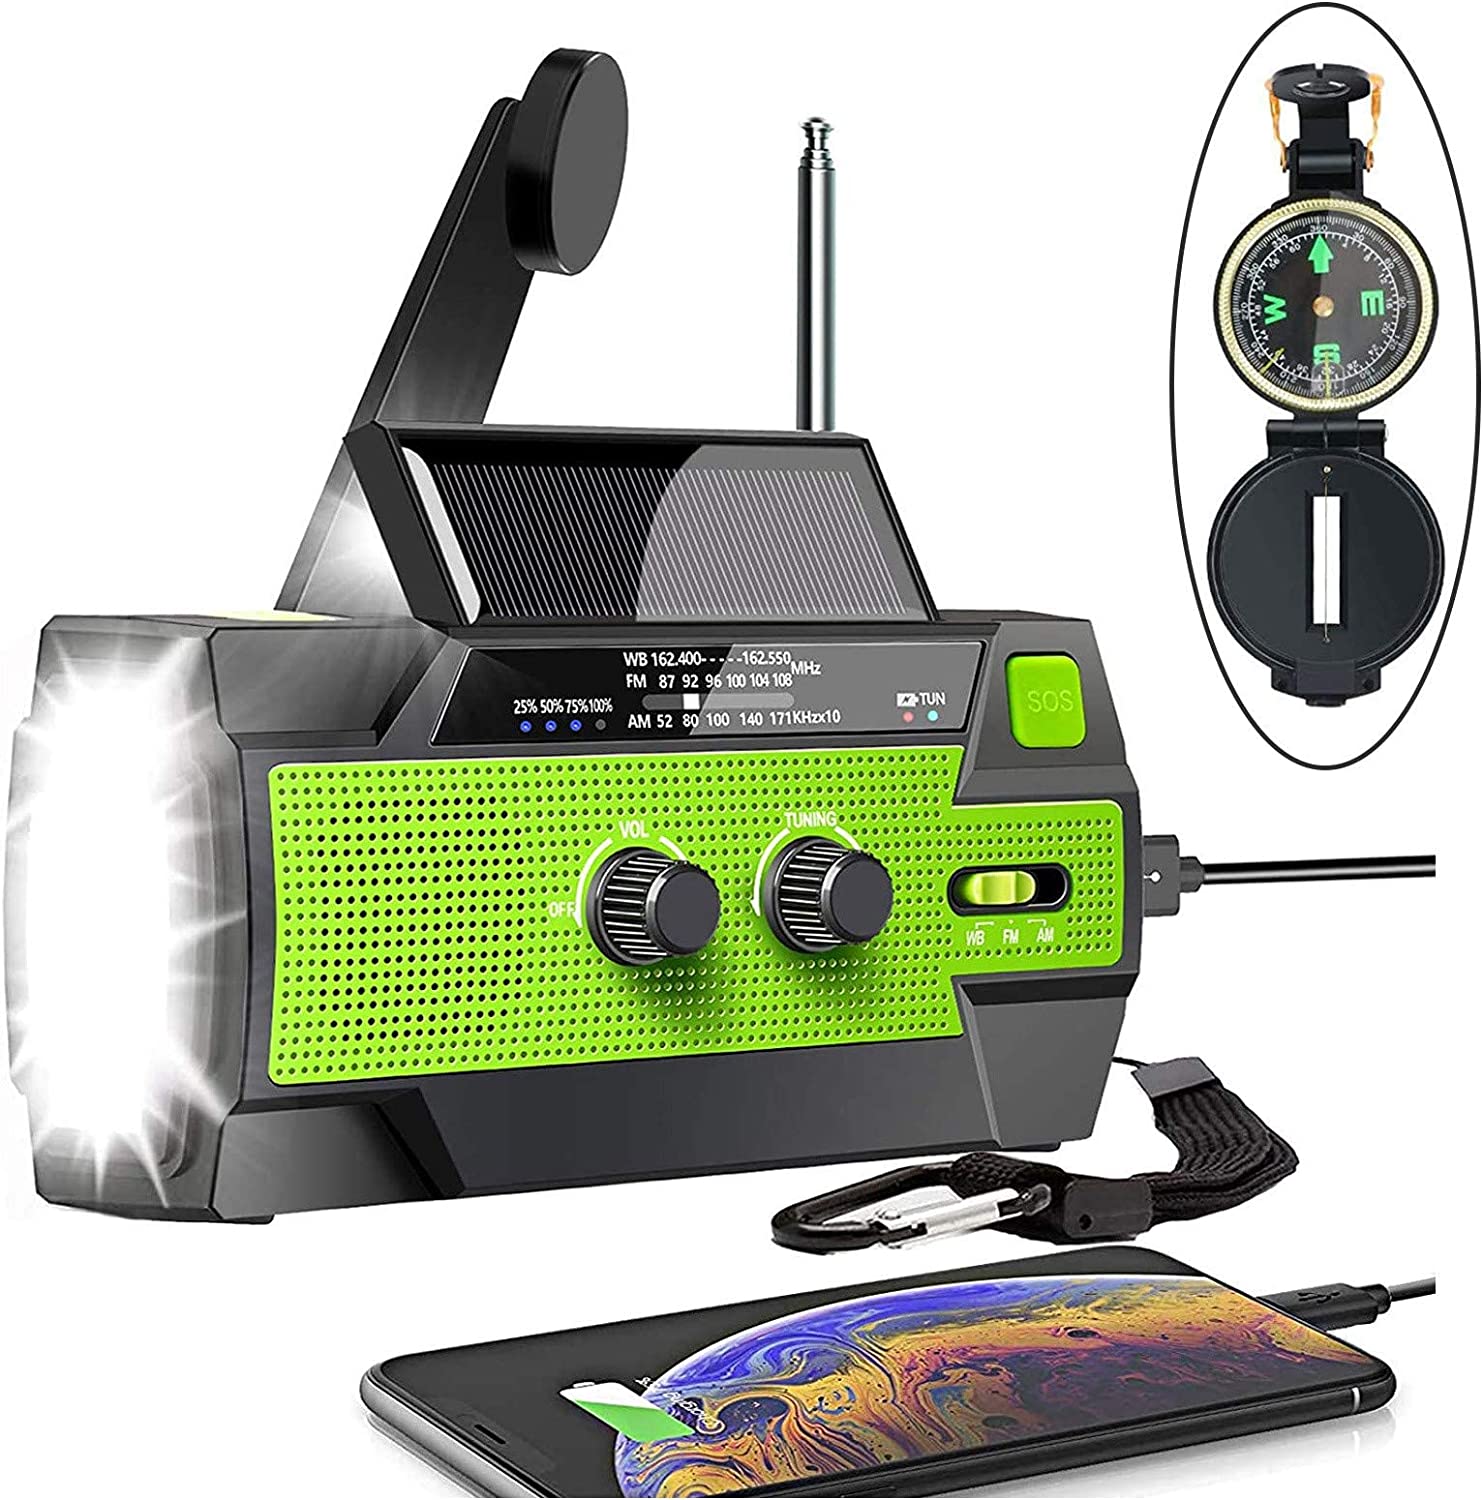 【2022 Upgraded】Emergency Solar Hand Crank Radio, 4000mAh Portable Weather Radio, AM/FM/NOAA, 3 Gear LED Flashlight, Motion Sensor Reading Lamp, Phone Charger, SOS Alert & Compass for Home and Outdoor